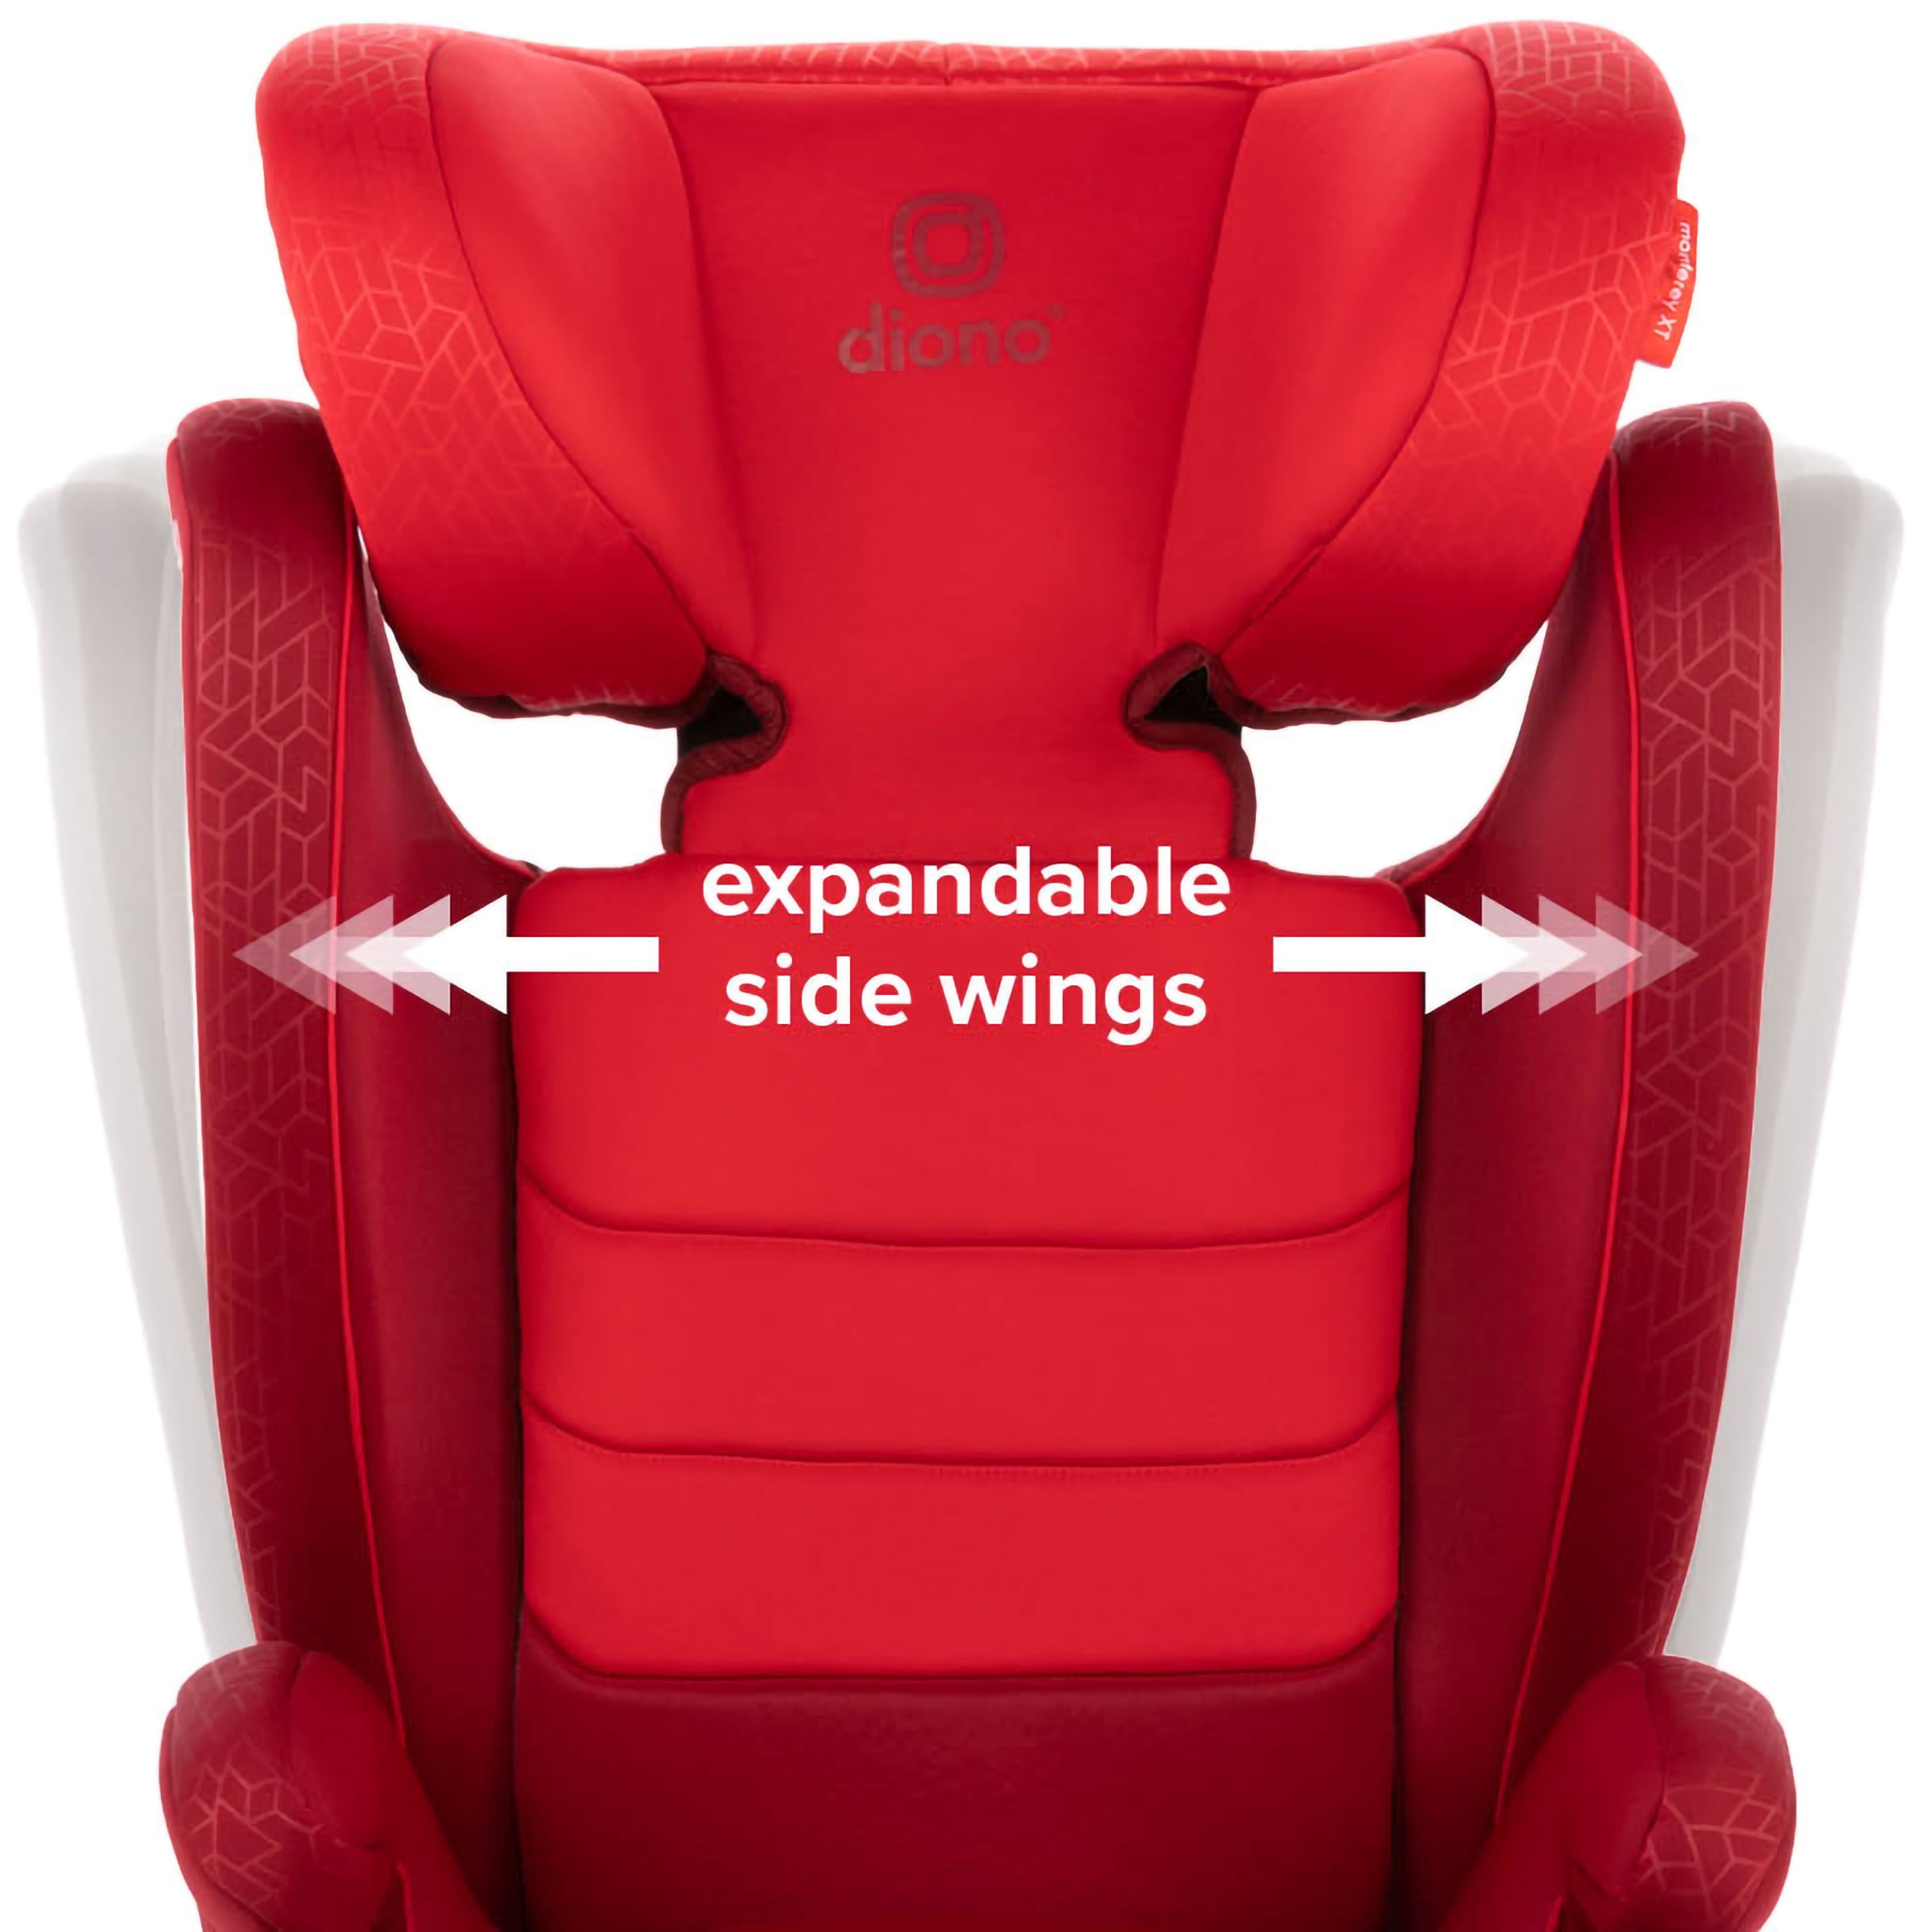 Diono Monterey XT Latch 2-in-1 Expandable Booster Car Seat, Red -  Walmart.com